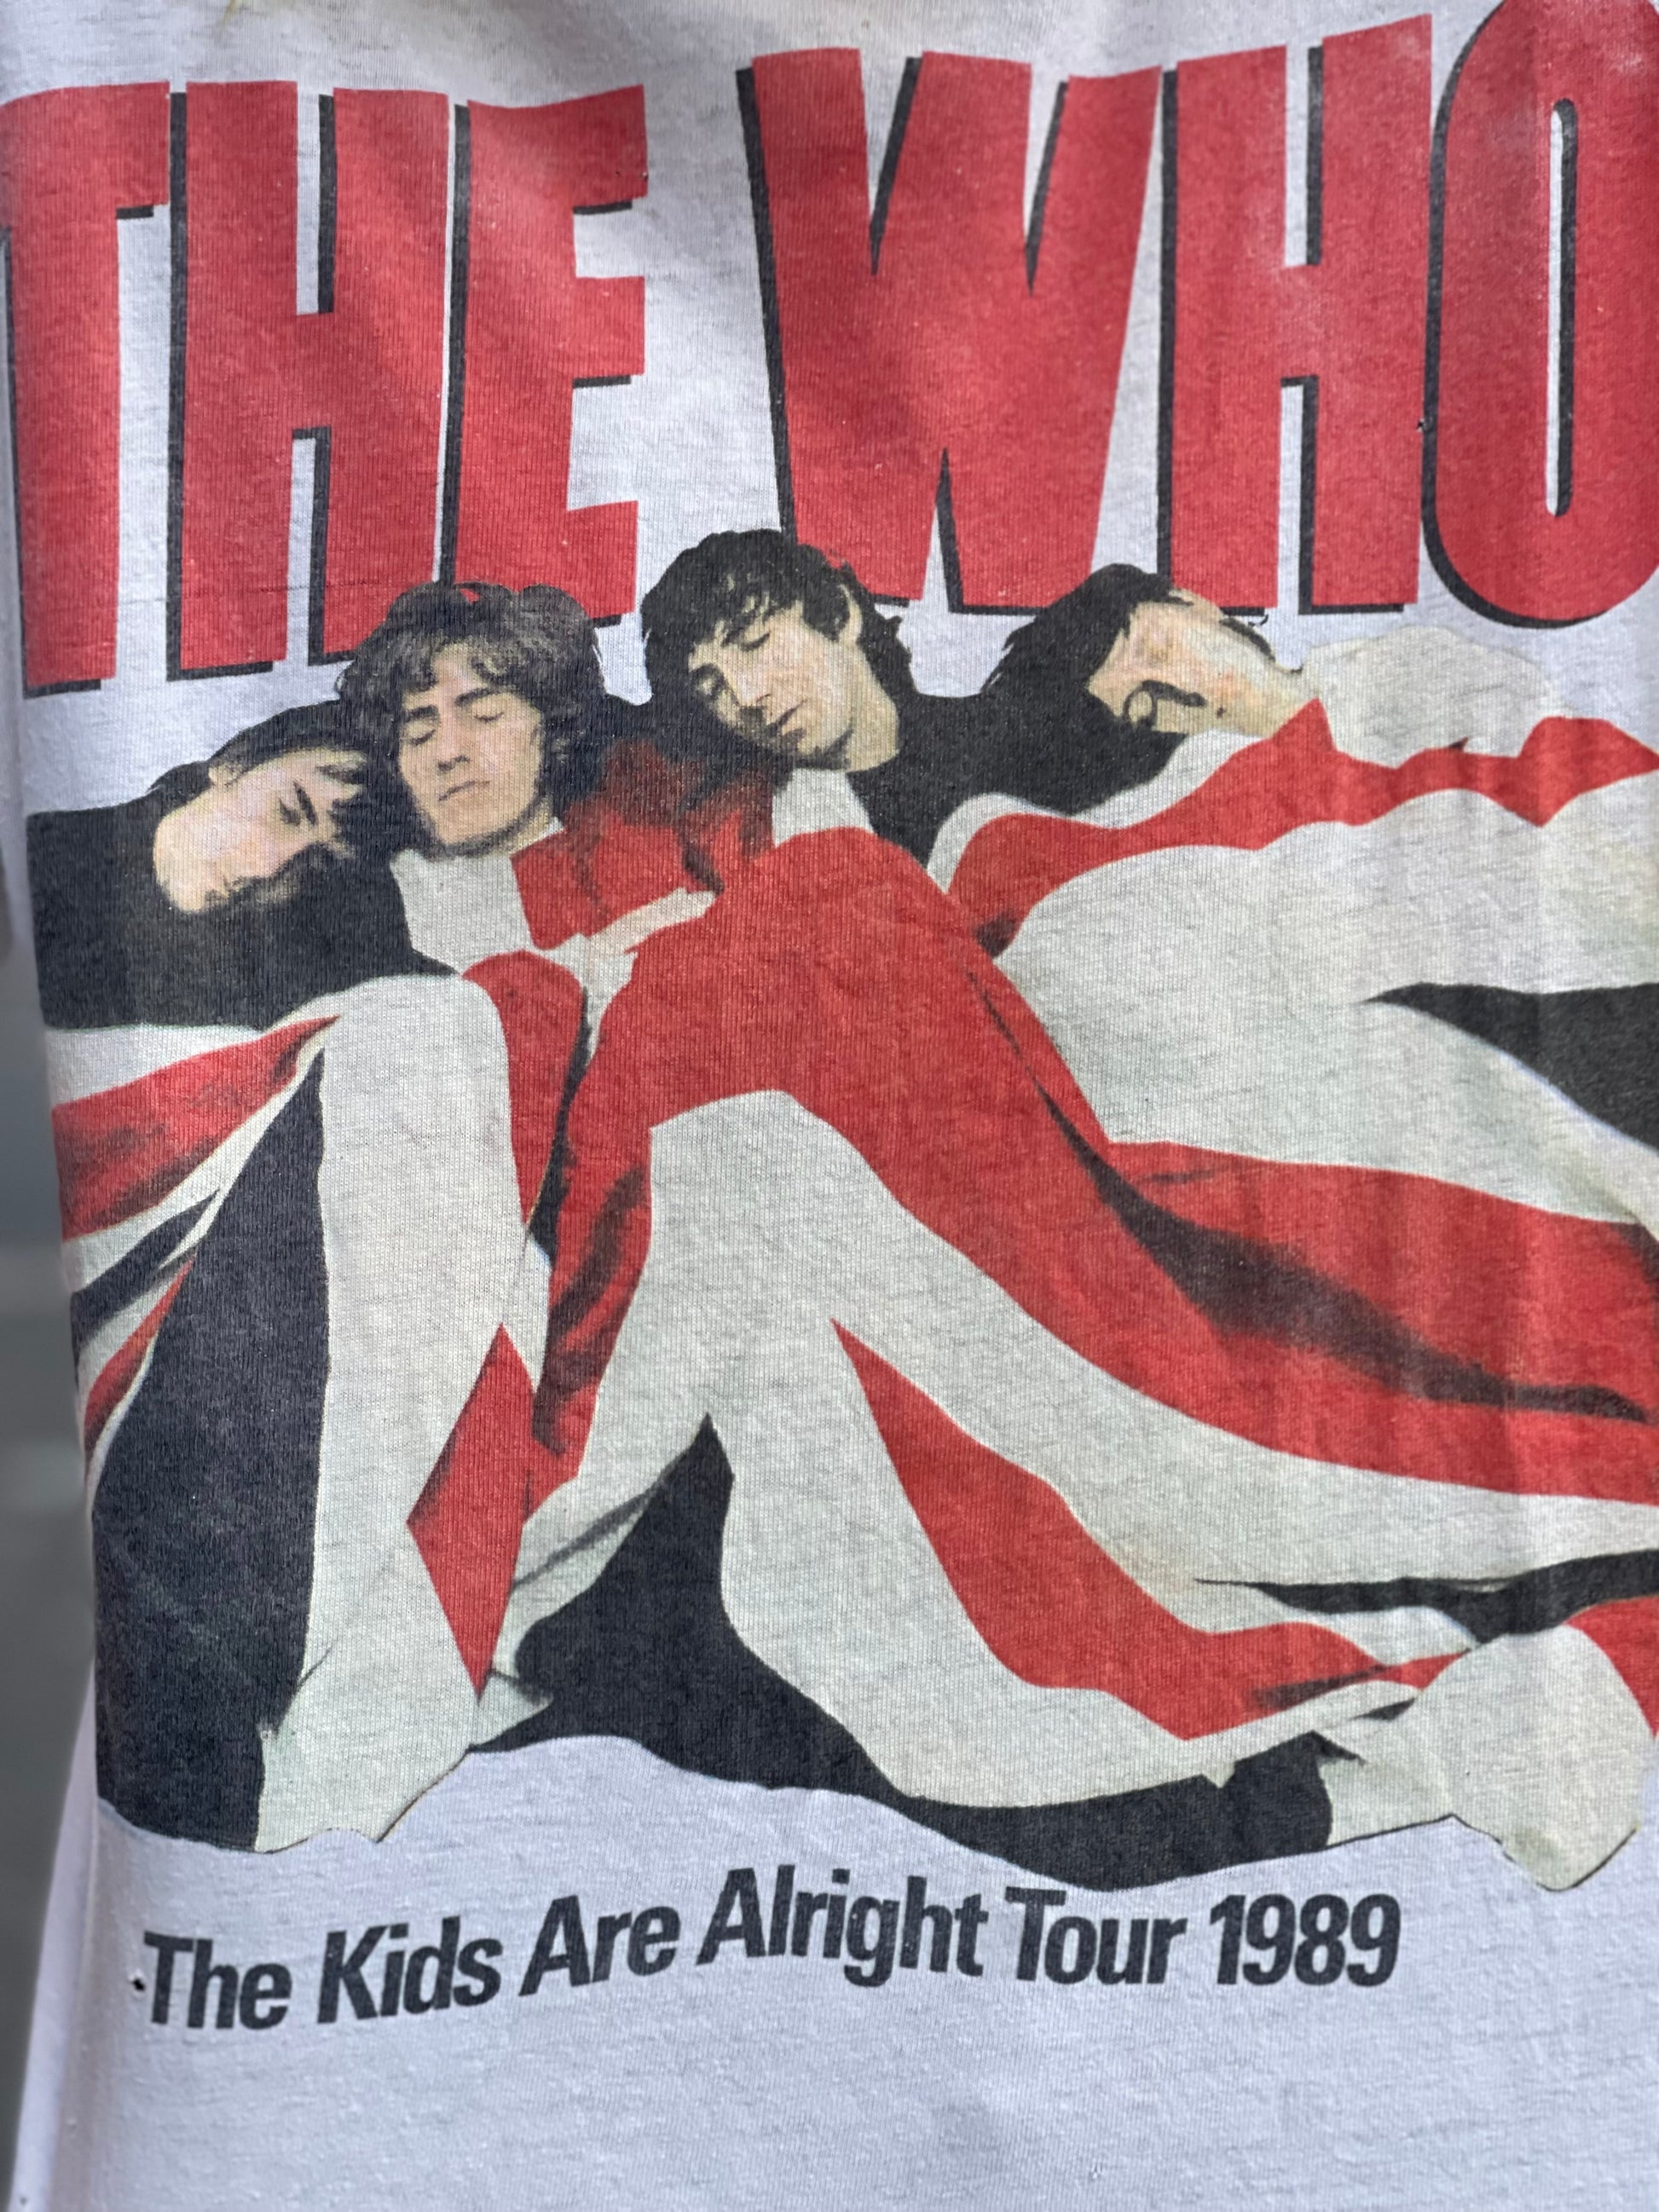 Vintage British Rock Band The WHO T-shirt - Spark Pretty